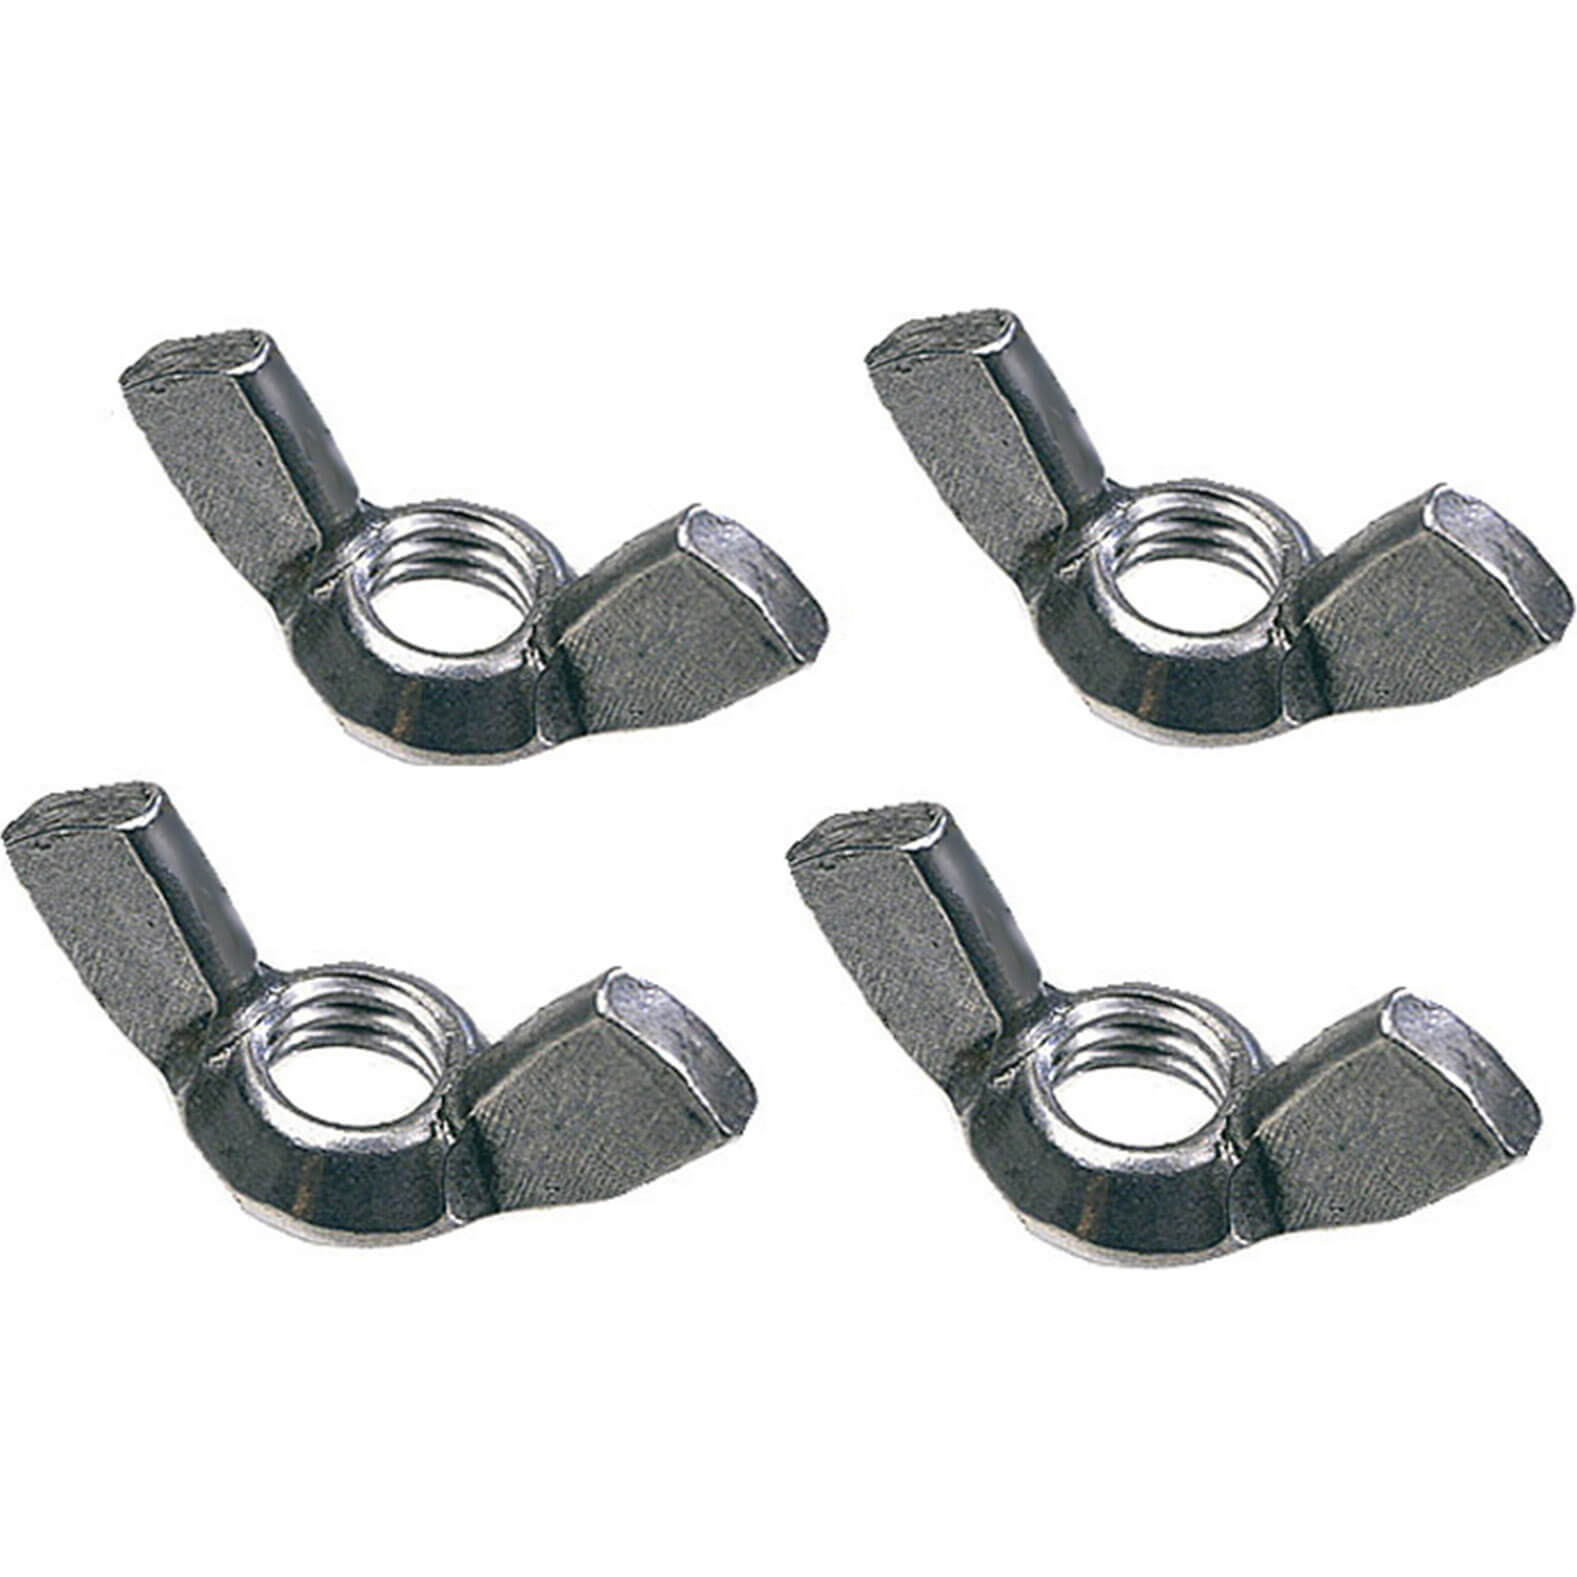 Image of Faithfull External Building Profile Wing Nuts Pack of 4